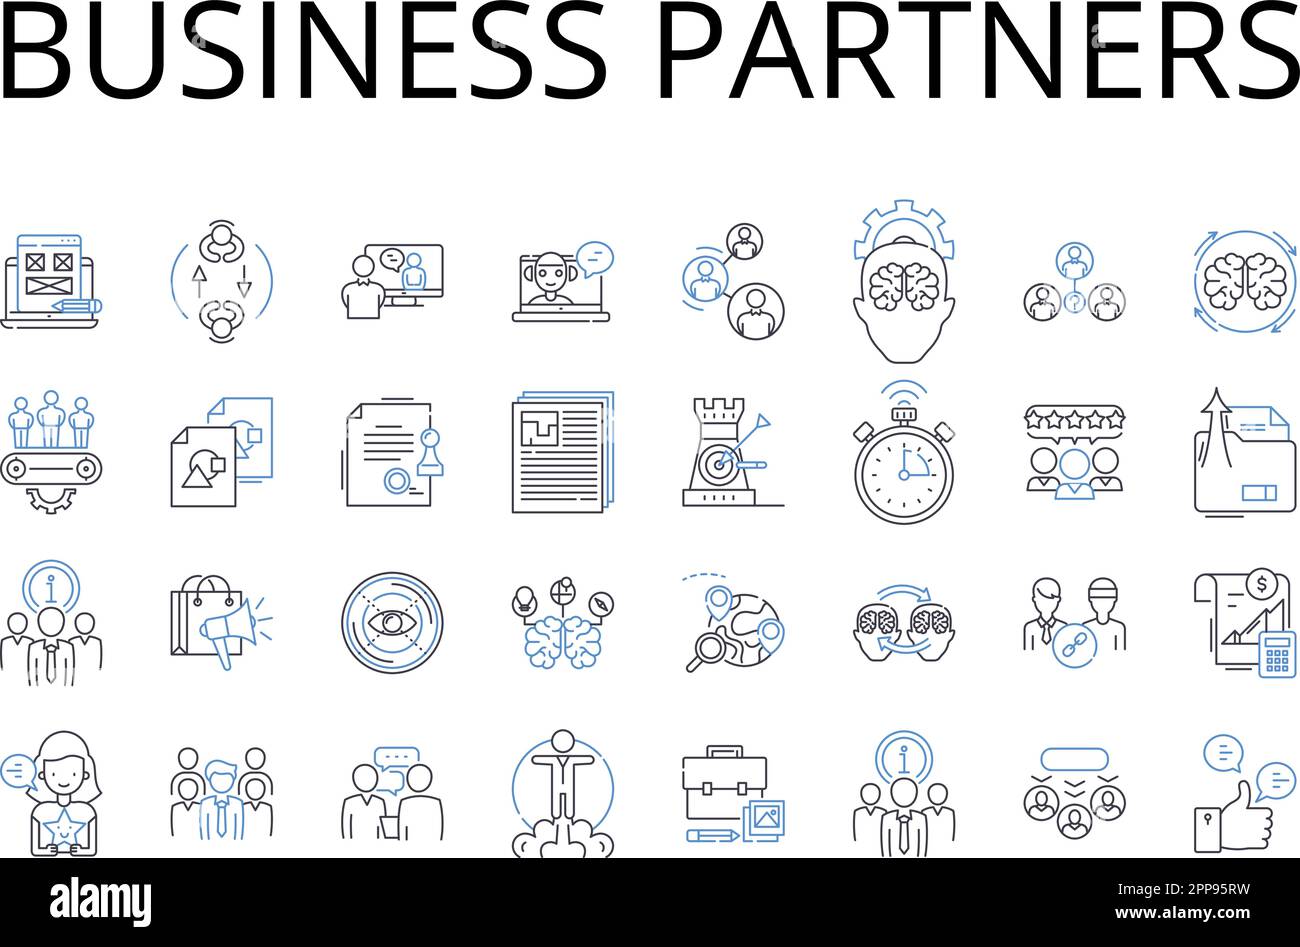 Business Partners line icons collection. Collaborative Team, Cooperative Alliance, Joint Venture, Complementary Pair, Dynamic Duo, Symbiotic Stock Vector